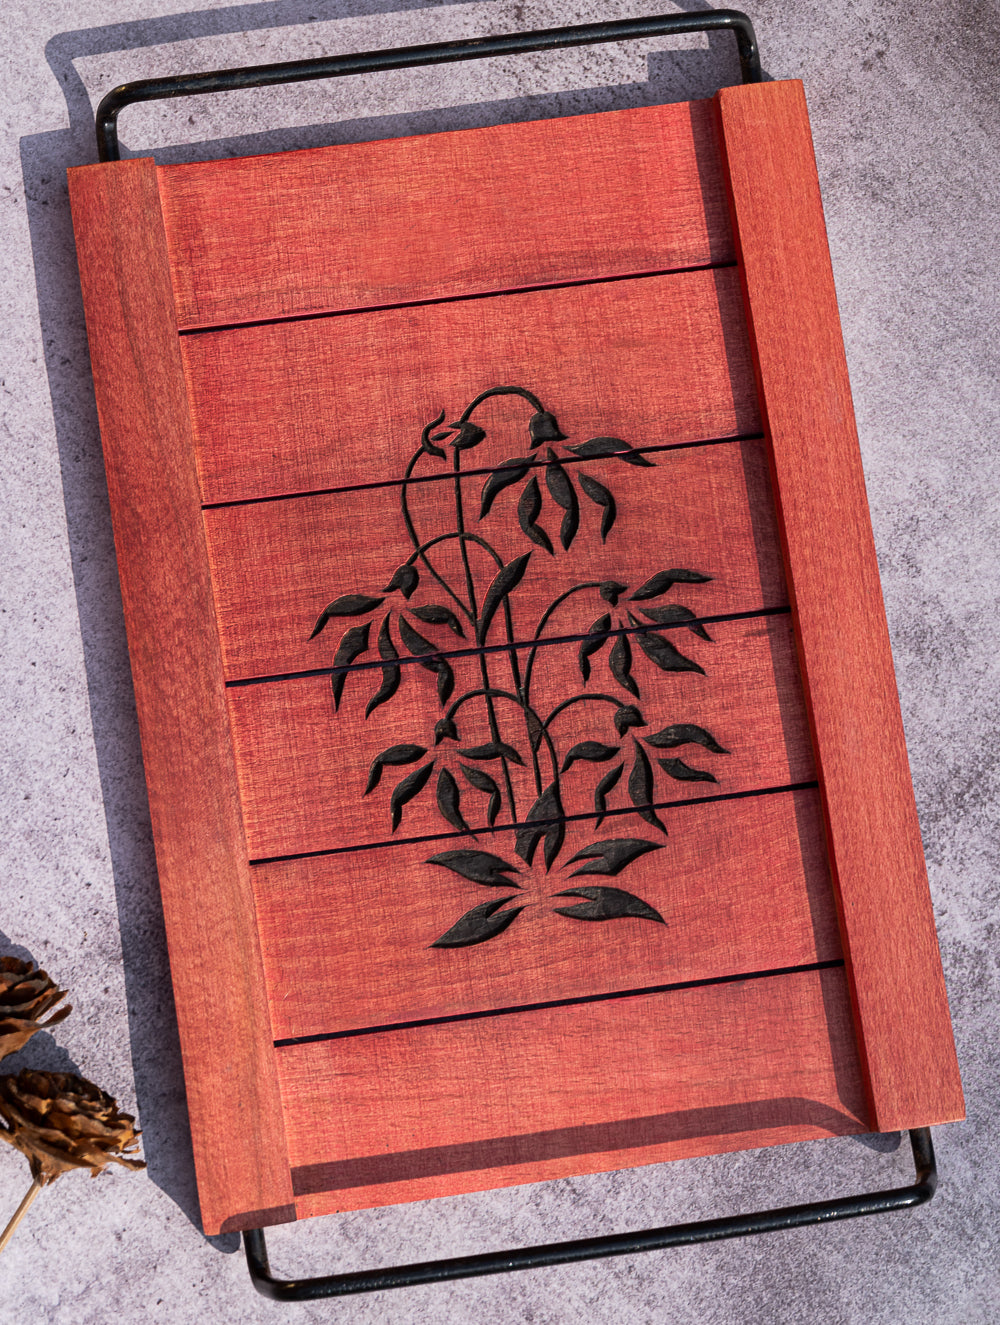 Load image into Gallery viewer, Wood Engraved Floral Tray